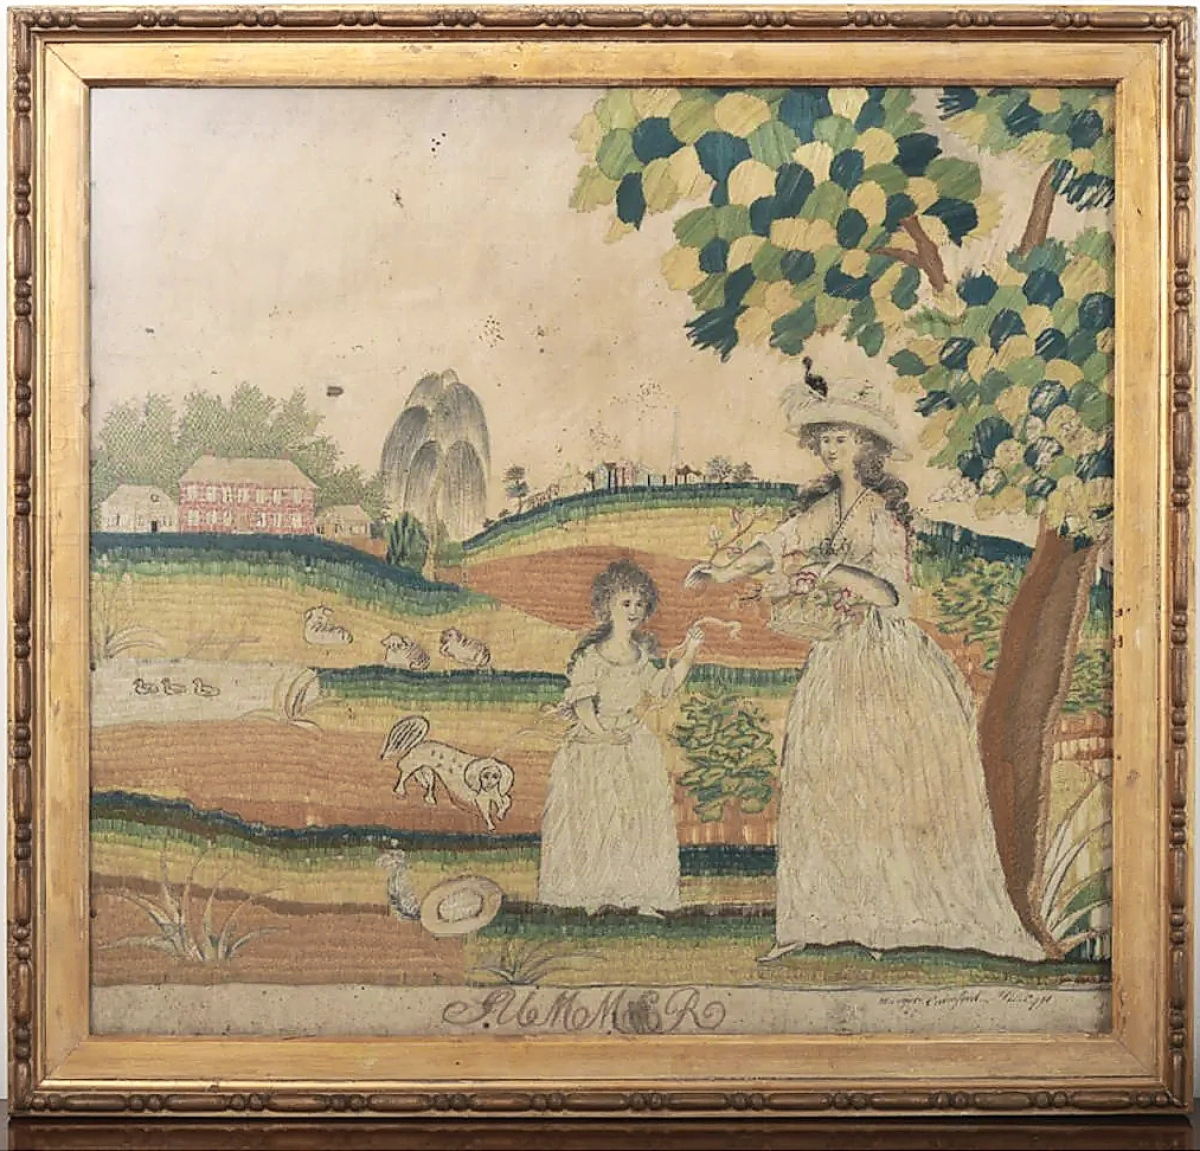 Selling for $4,428 was a 1791 needlework embroidery on silk by Margaret Crawford. The Philadelphia skyline can be seen in the background as a mother and daughter gather flowers.